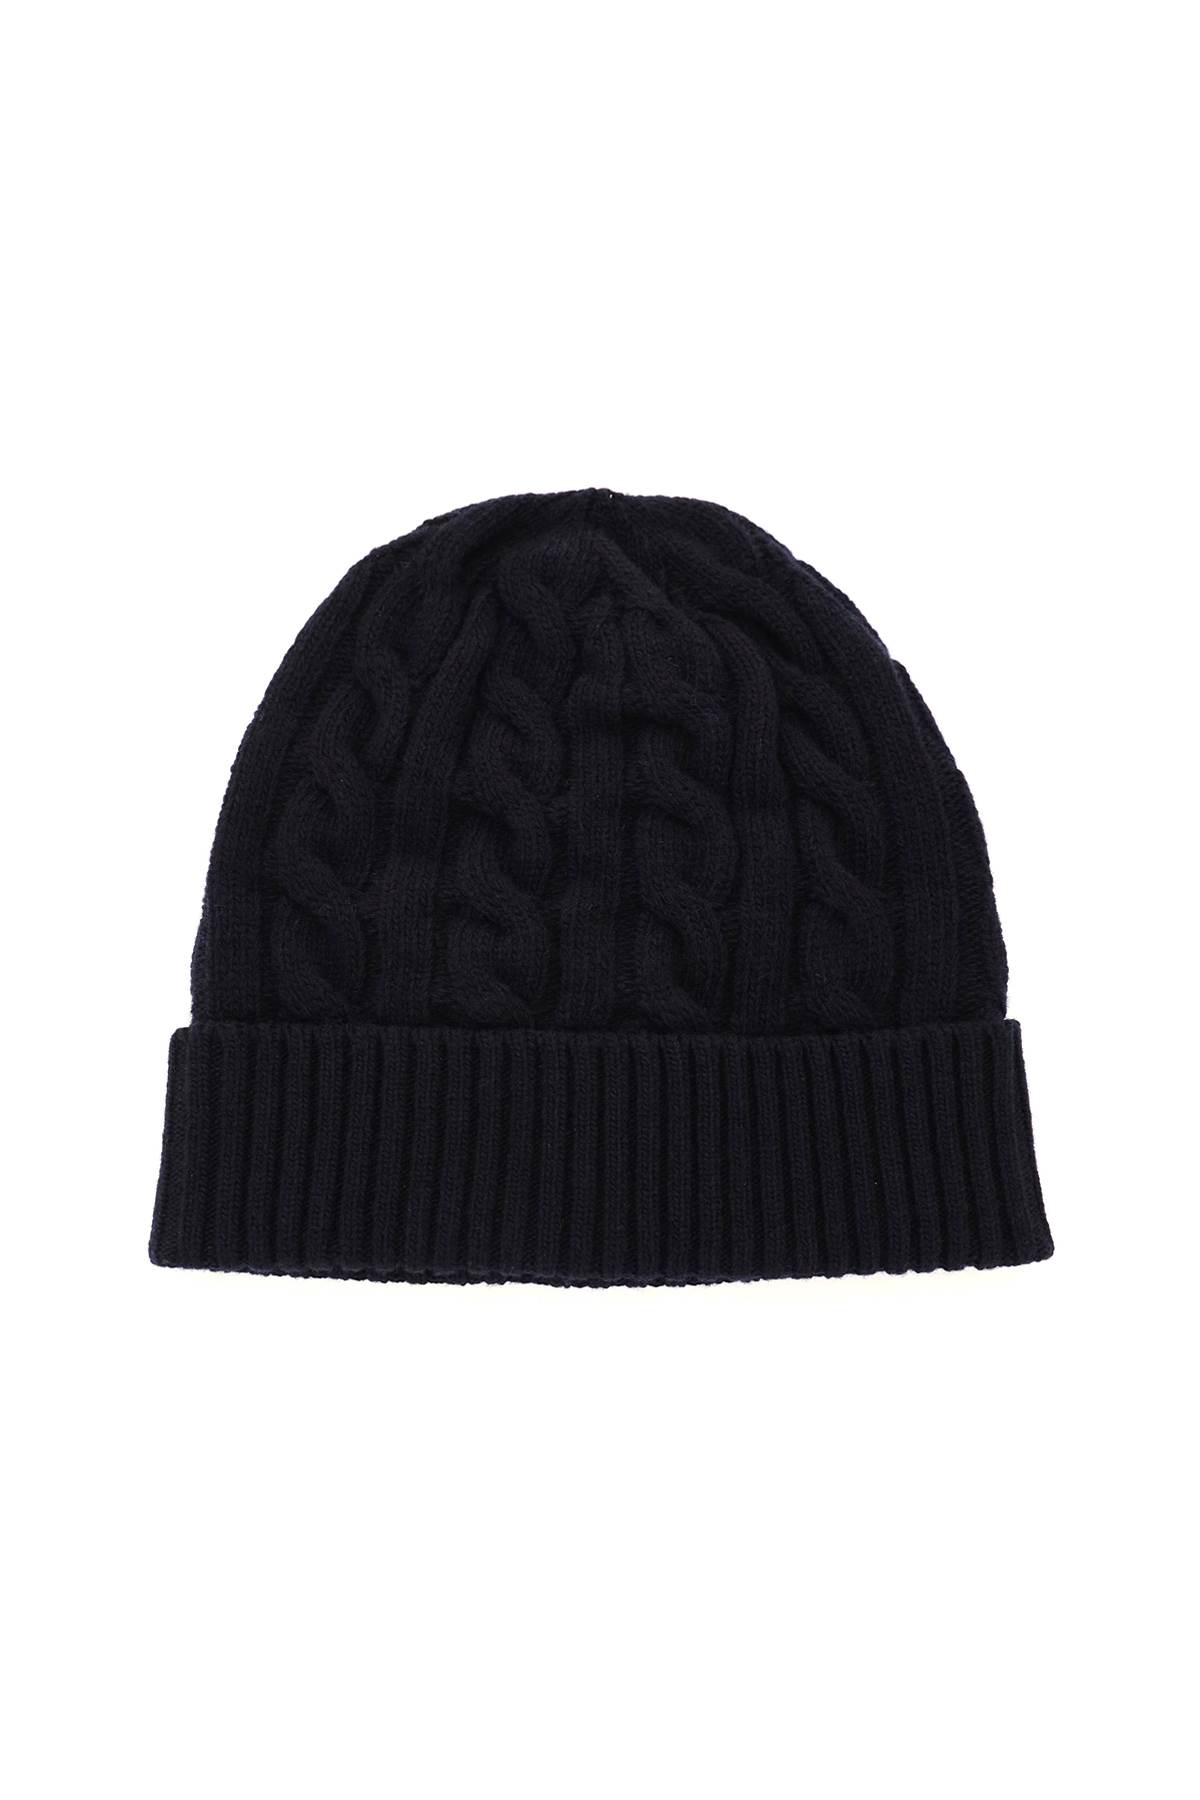 GM77 Cable Knit Beanie Hat